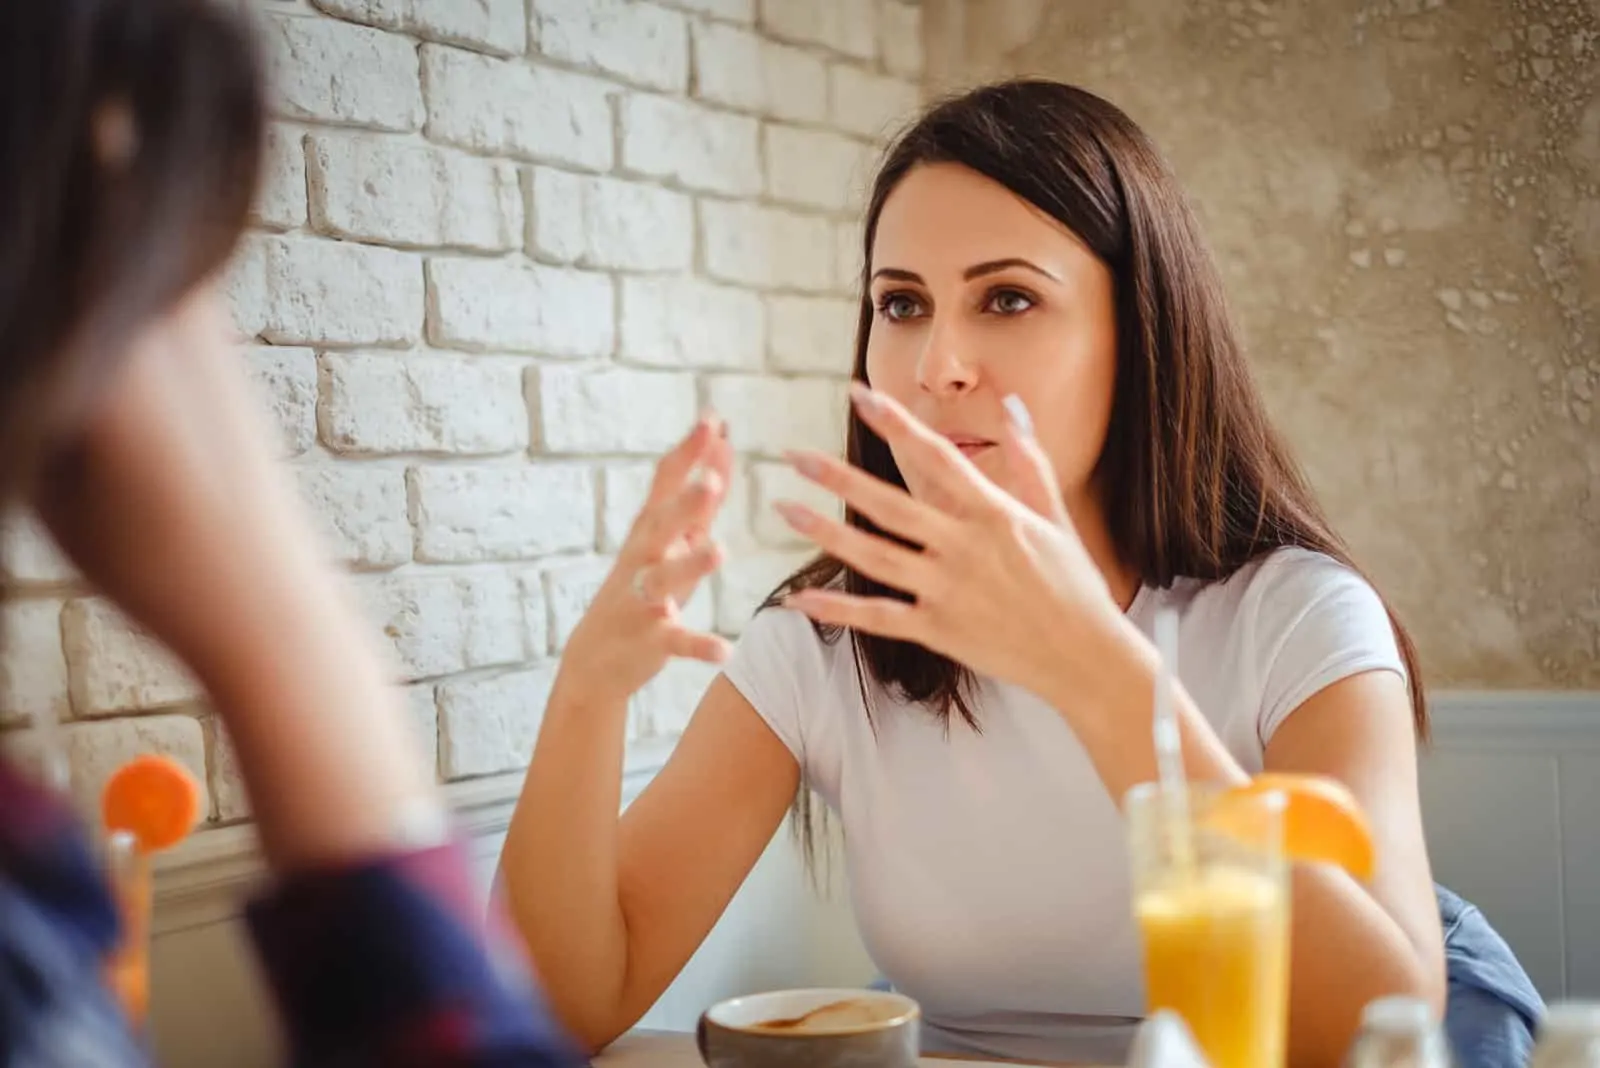 Girl explaining something with hands to her friend in the restaurant